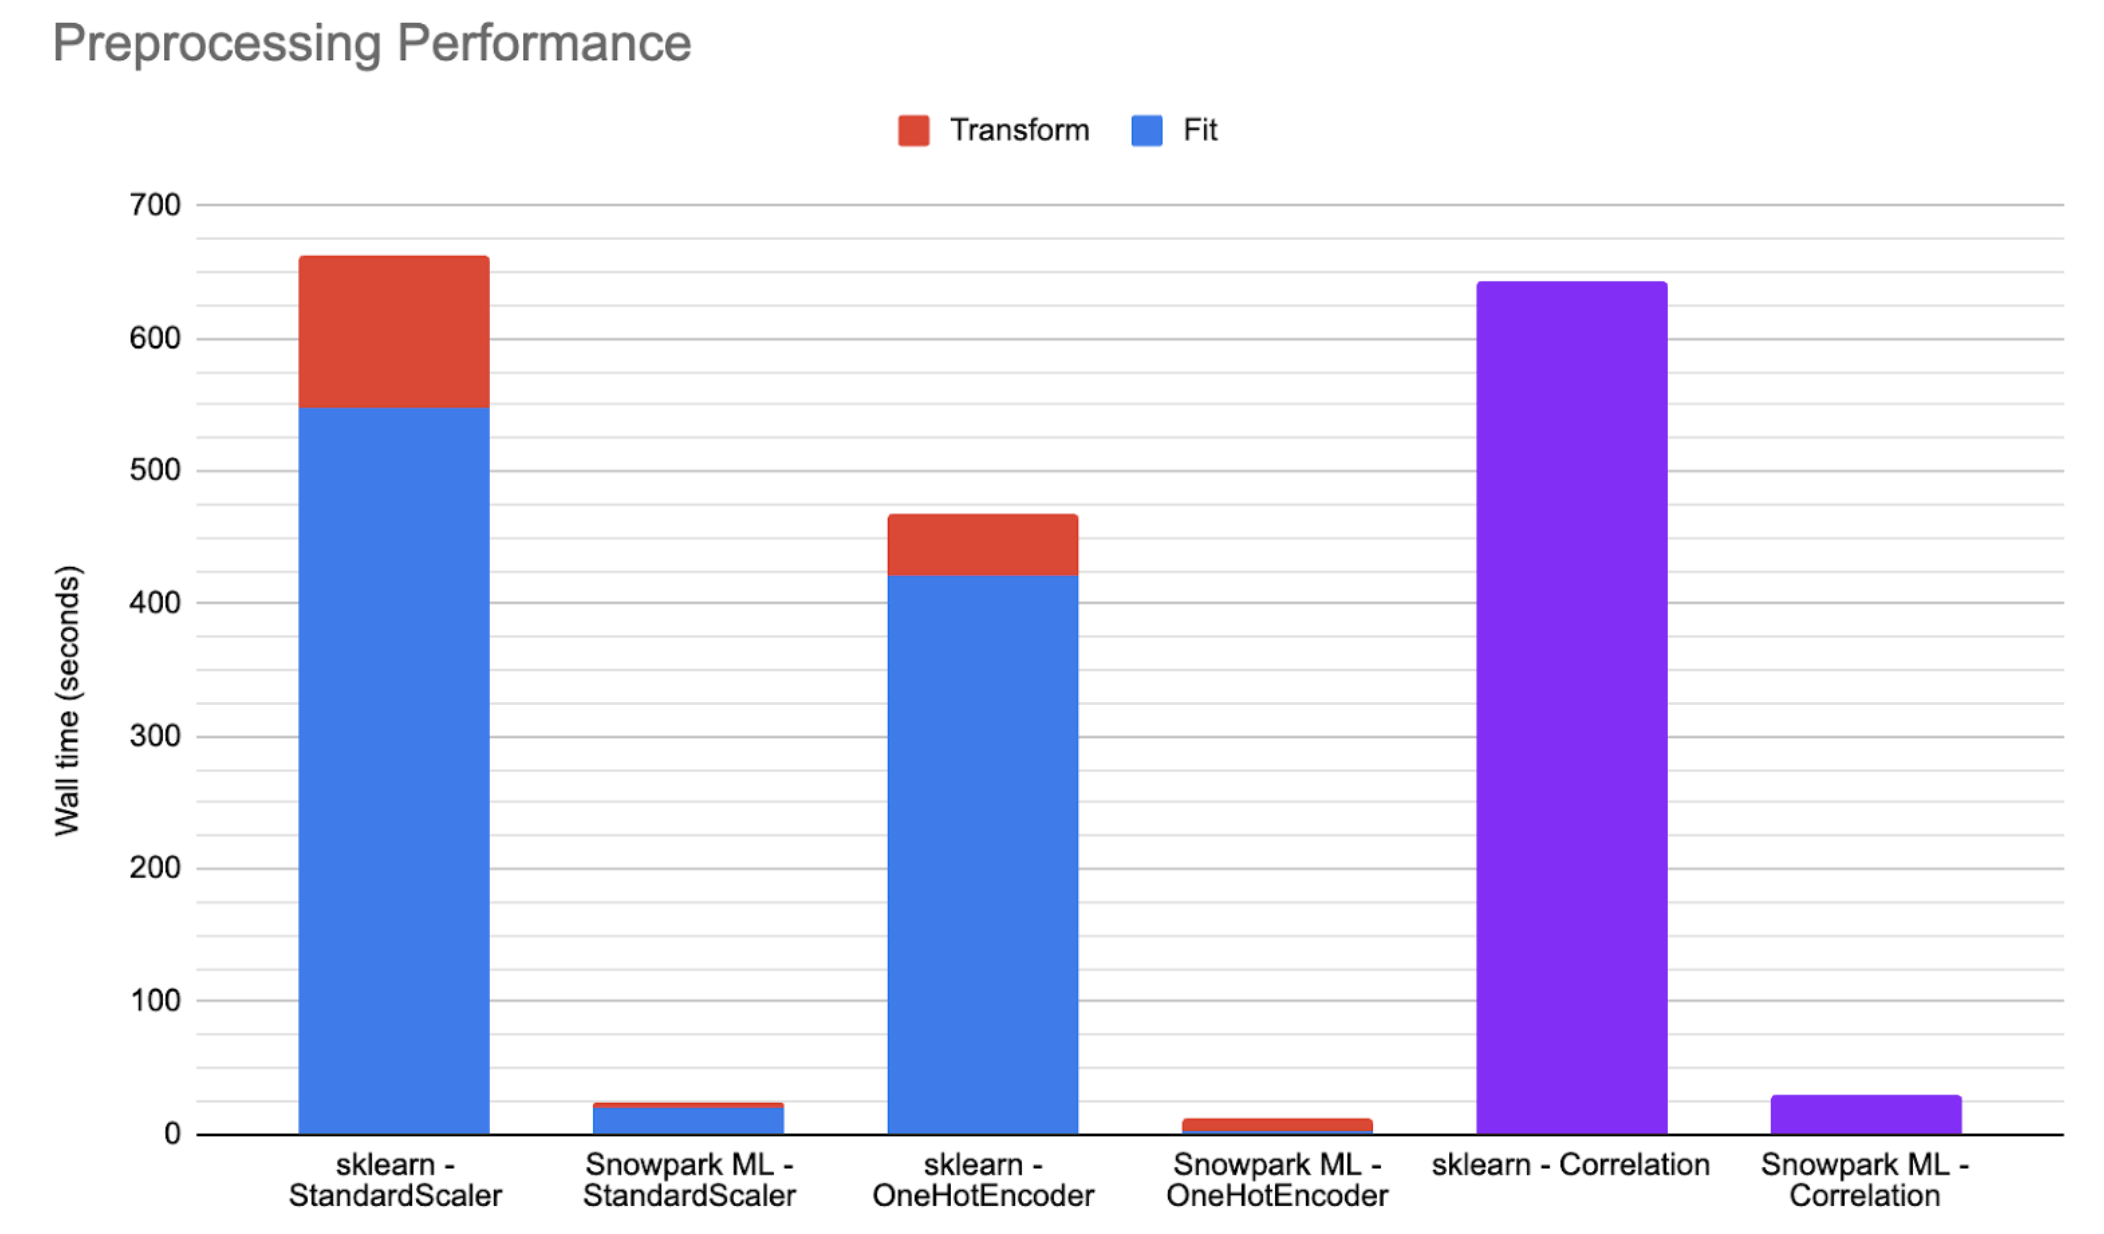 Illustration of performance improvements possible by distributed preprocessing